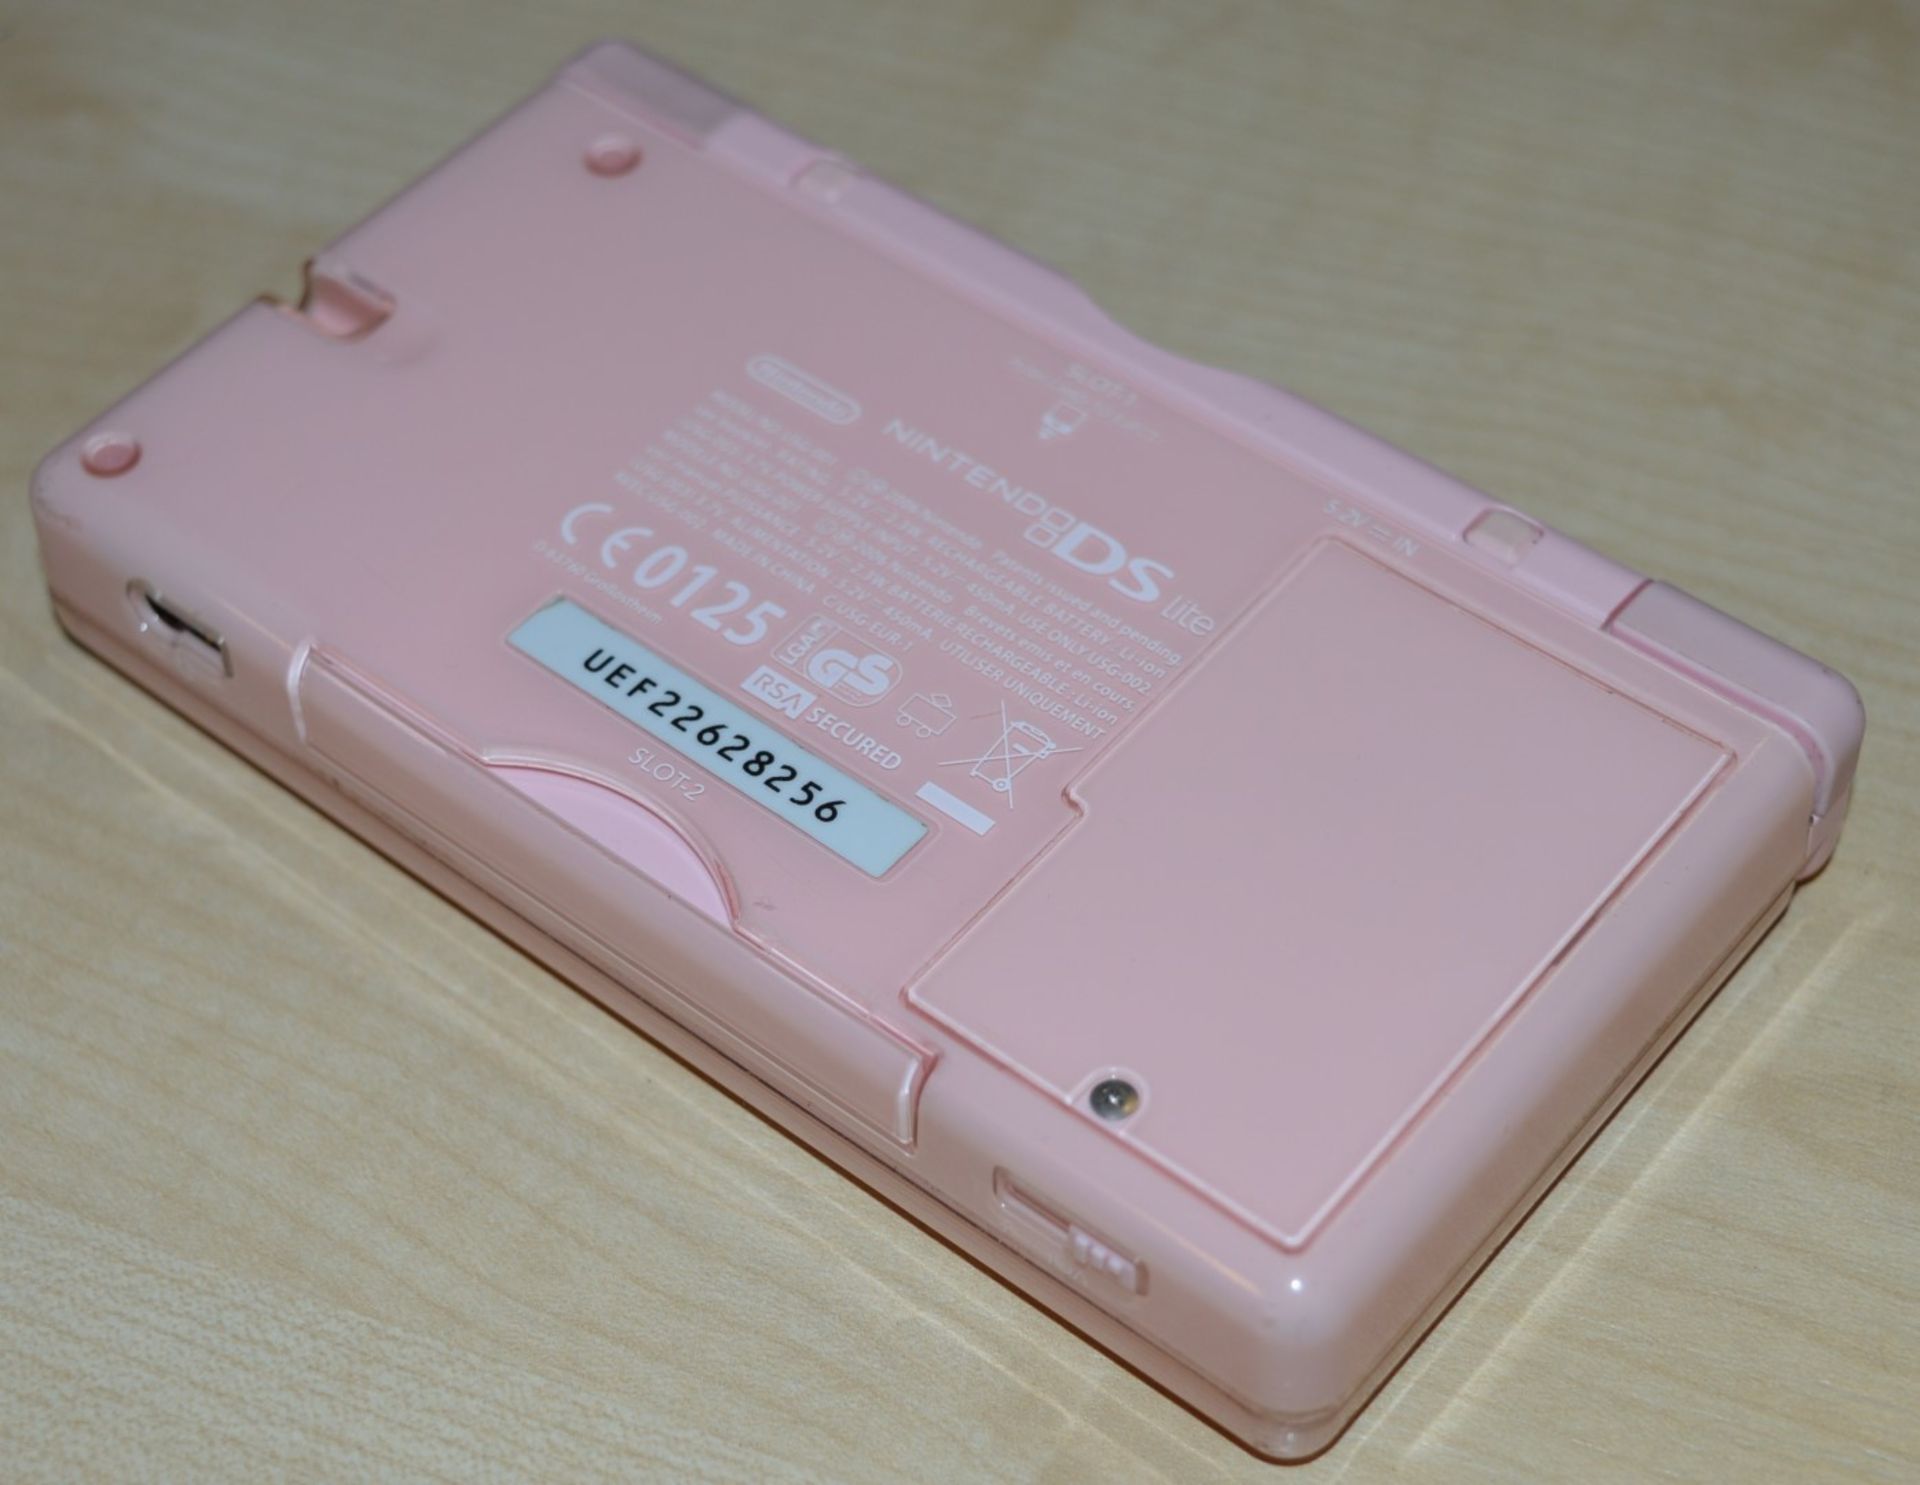 1 x Pink Nintendo DS Lite With High School Musical 2 Game - Includes Touch Pen and Charger - Good - Image 8 of 8